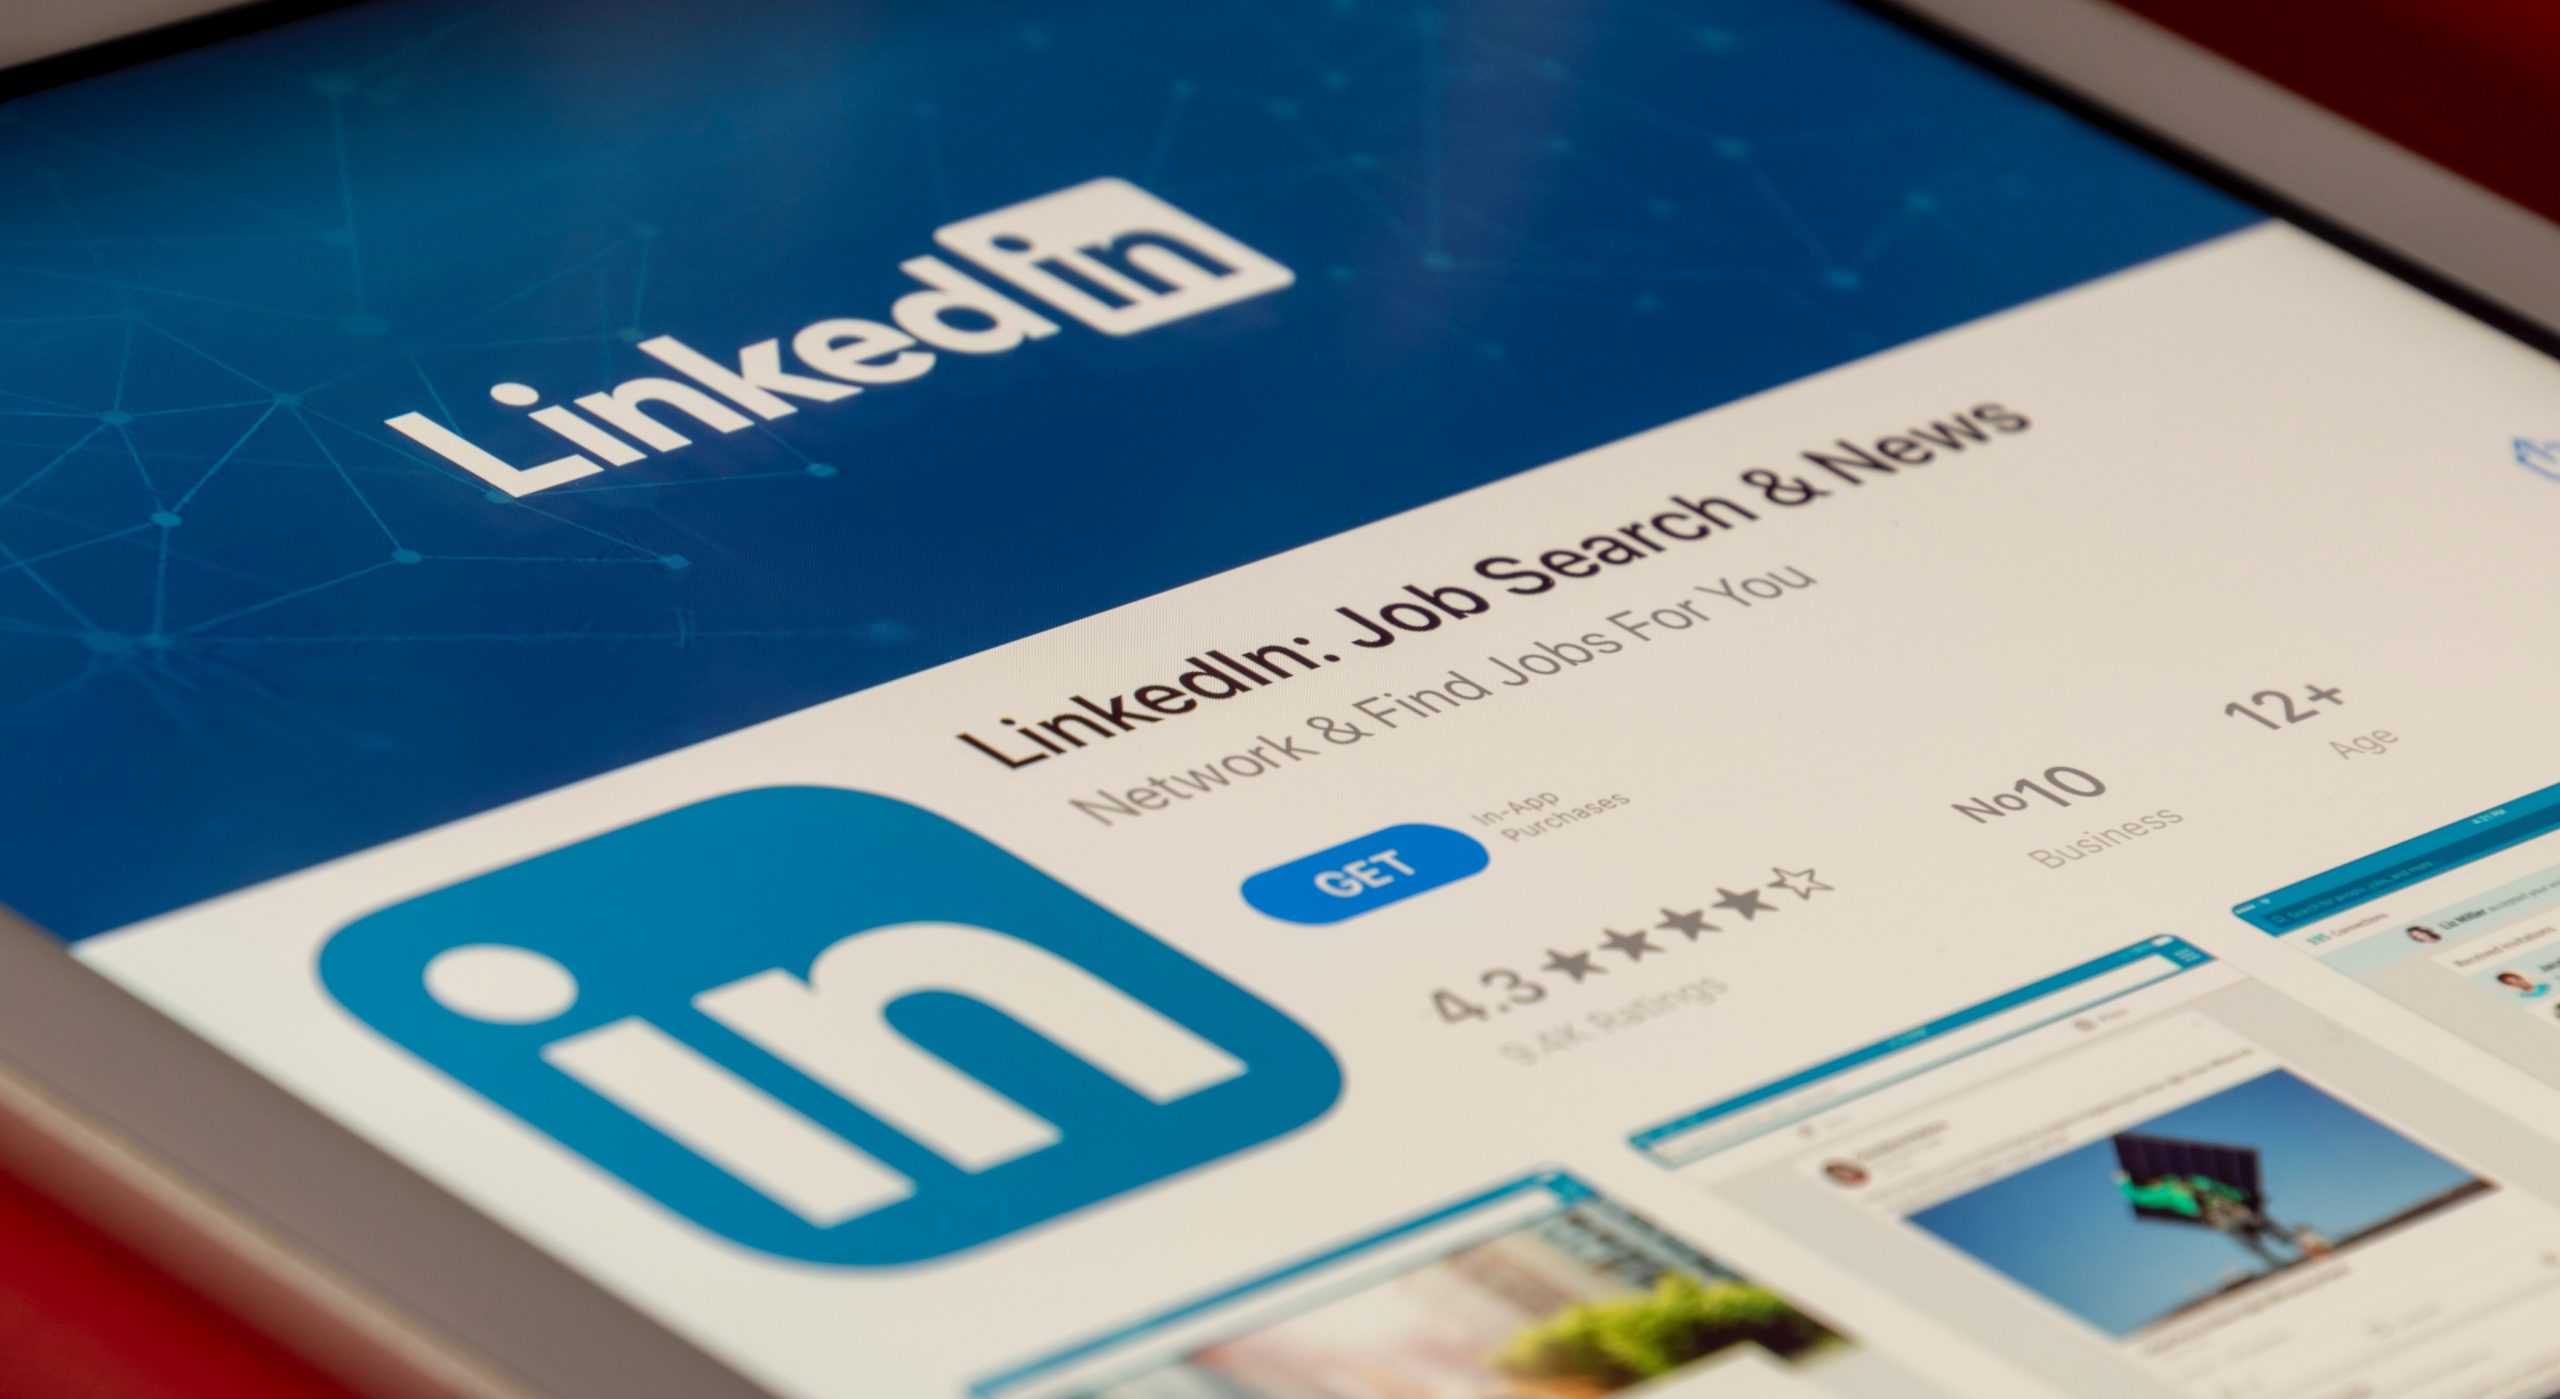 Tablet device displaying the LinkedIn homepage.